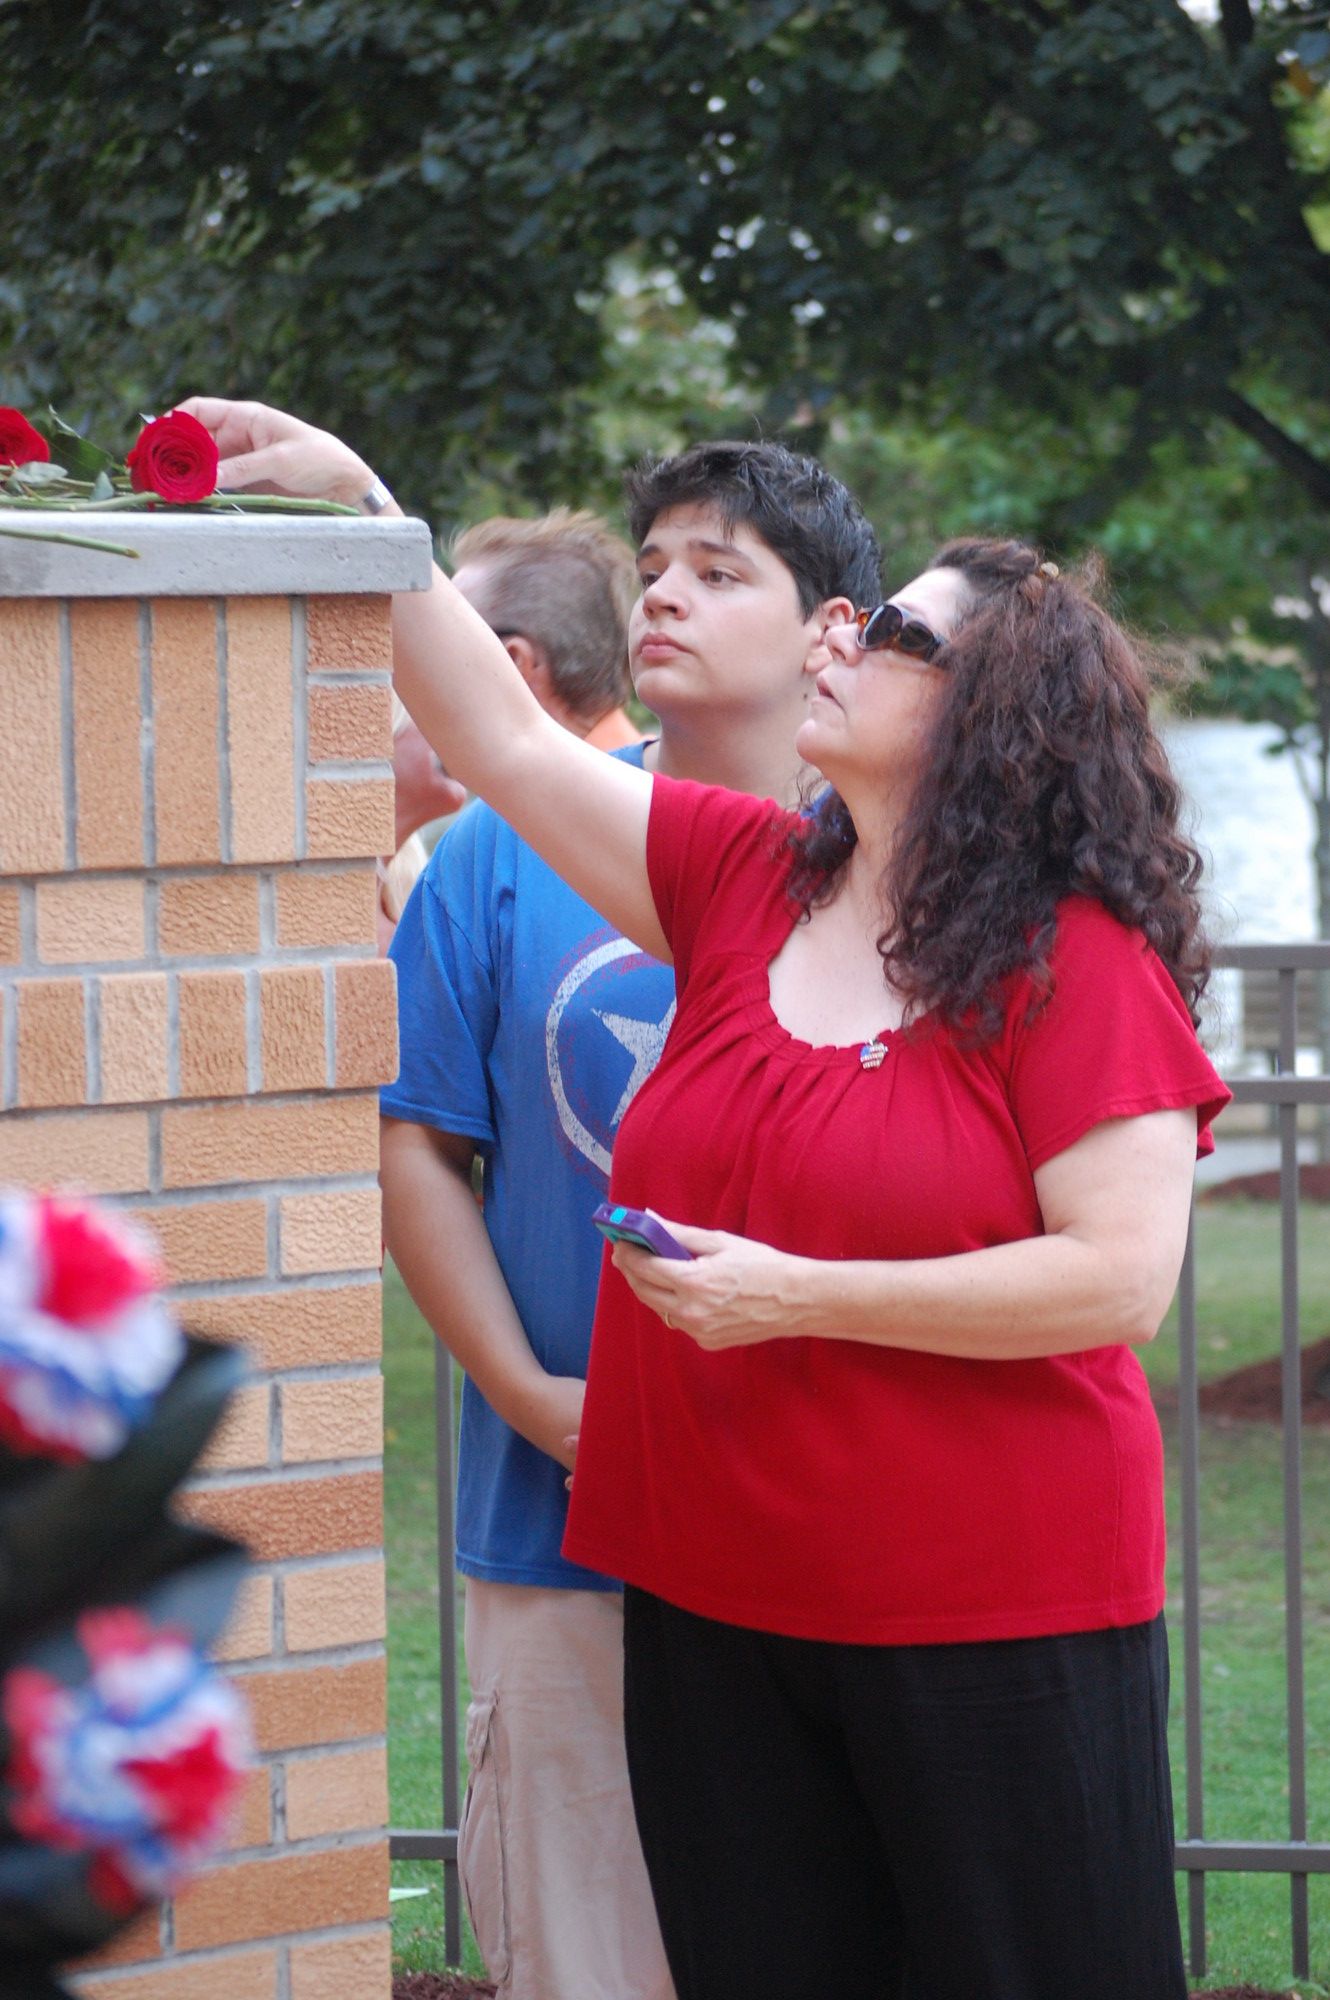 Mourners placed carnations on the monument at Hendrickson Park.